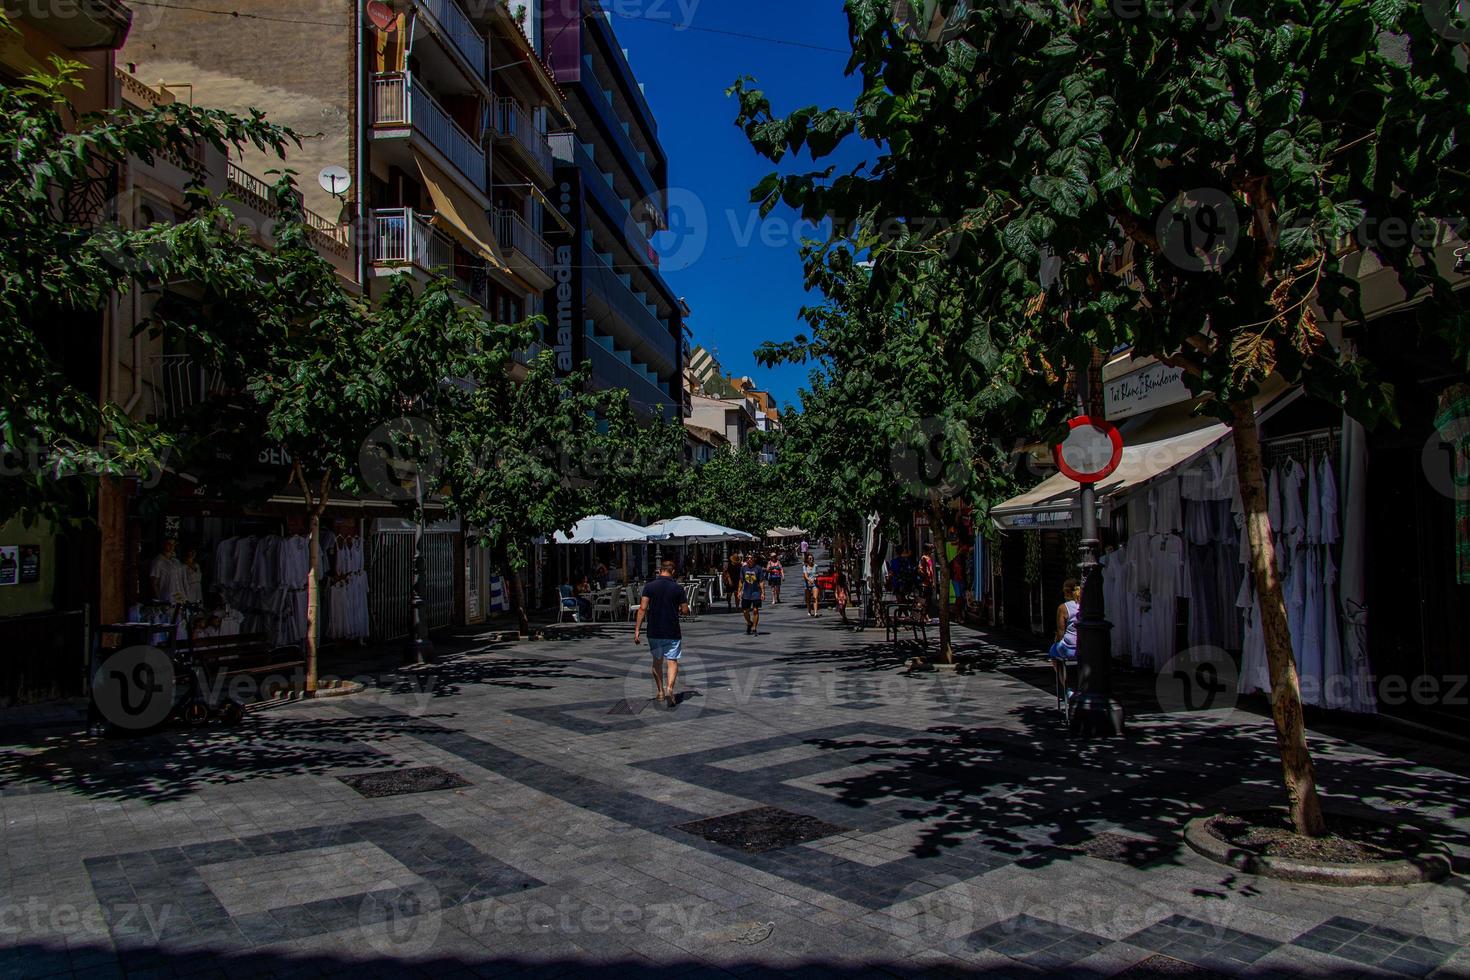 narrow streets in the old town of Benidorm, Spain on a warm summer day photo